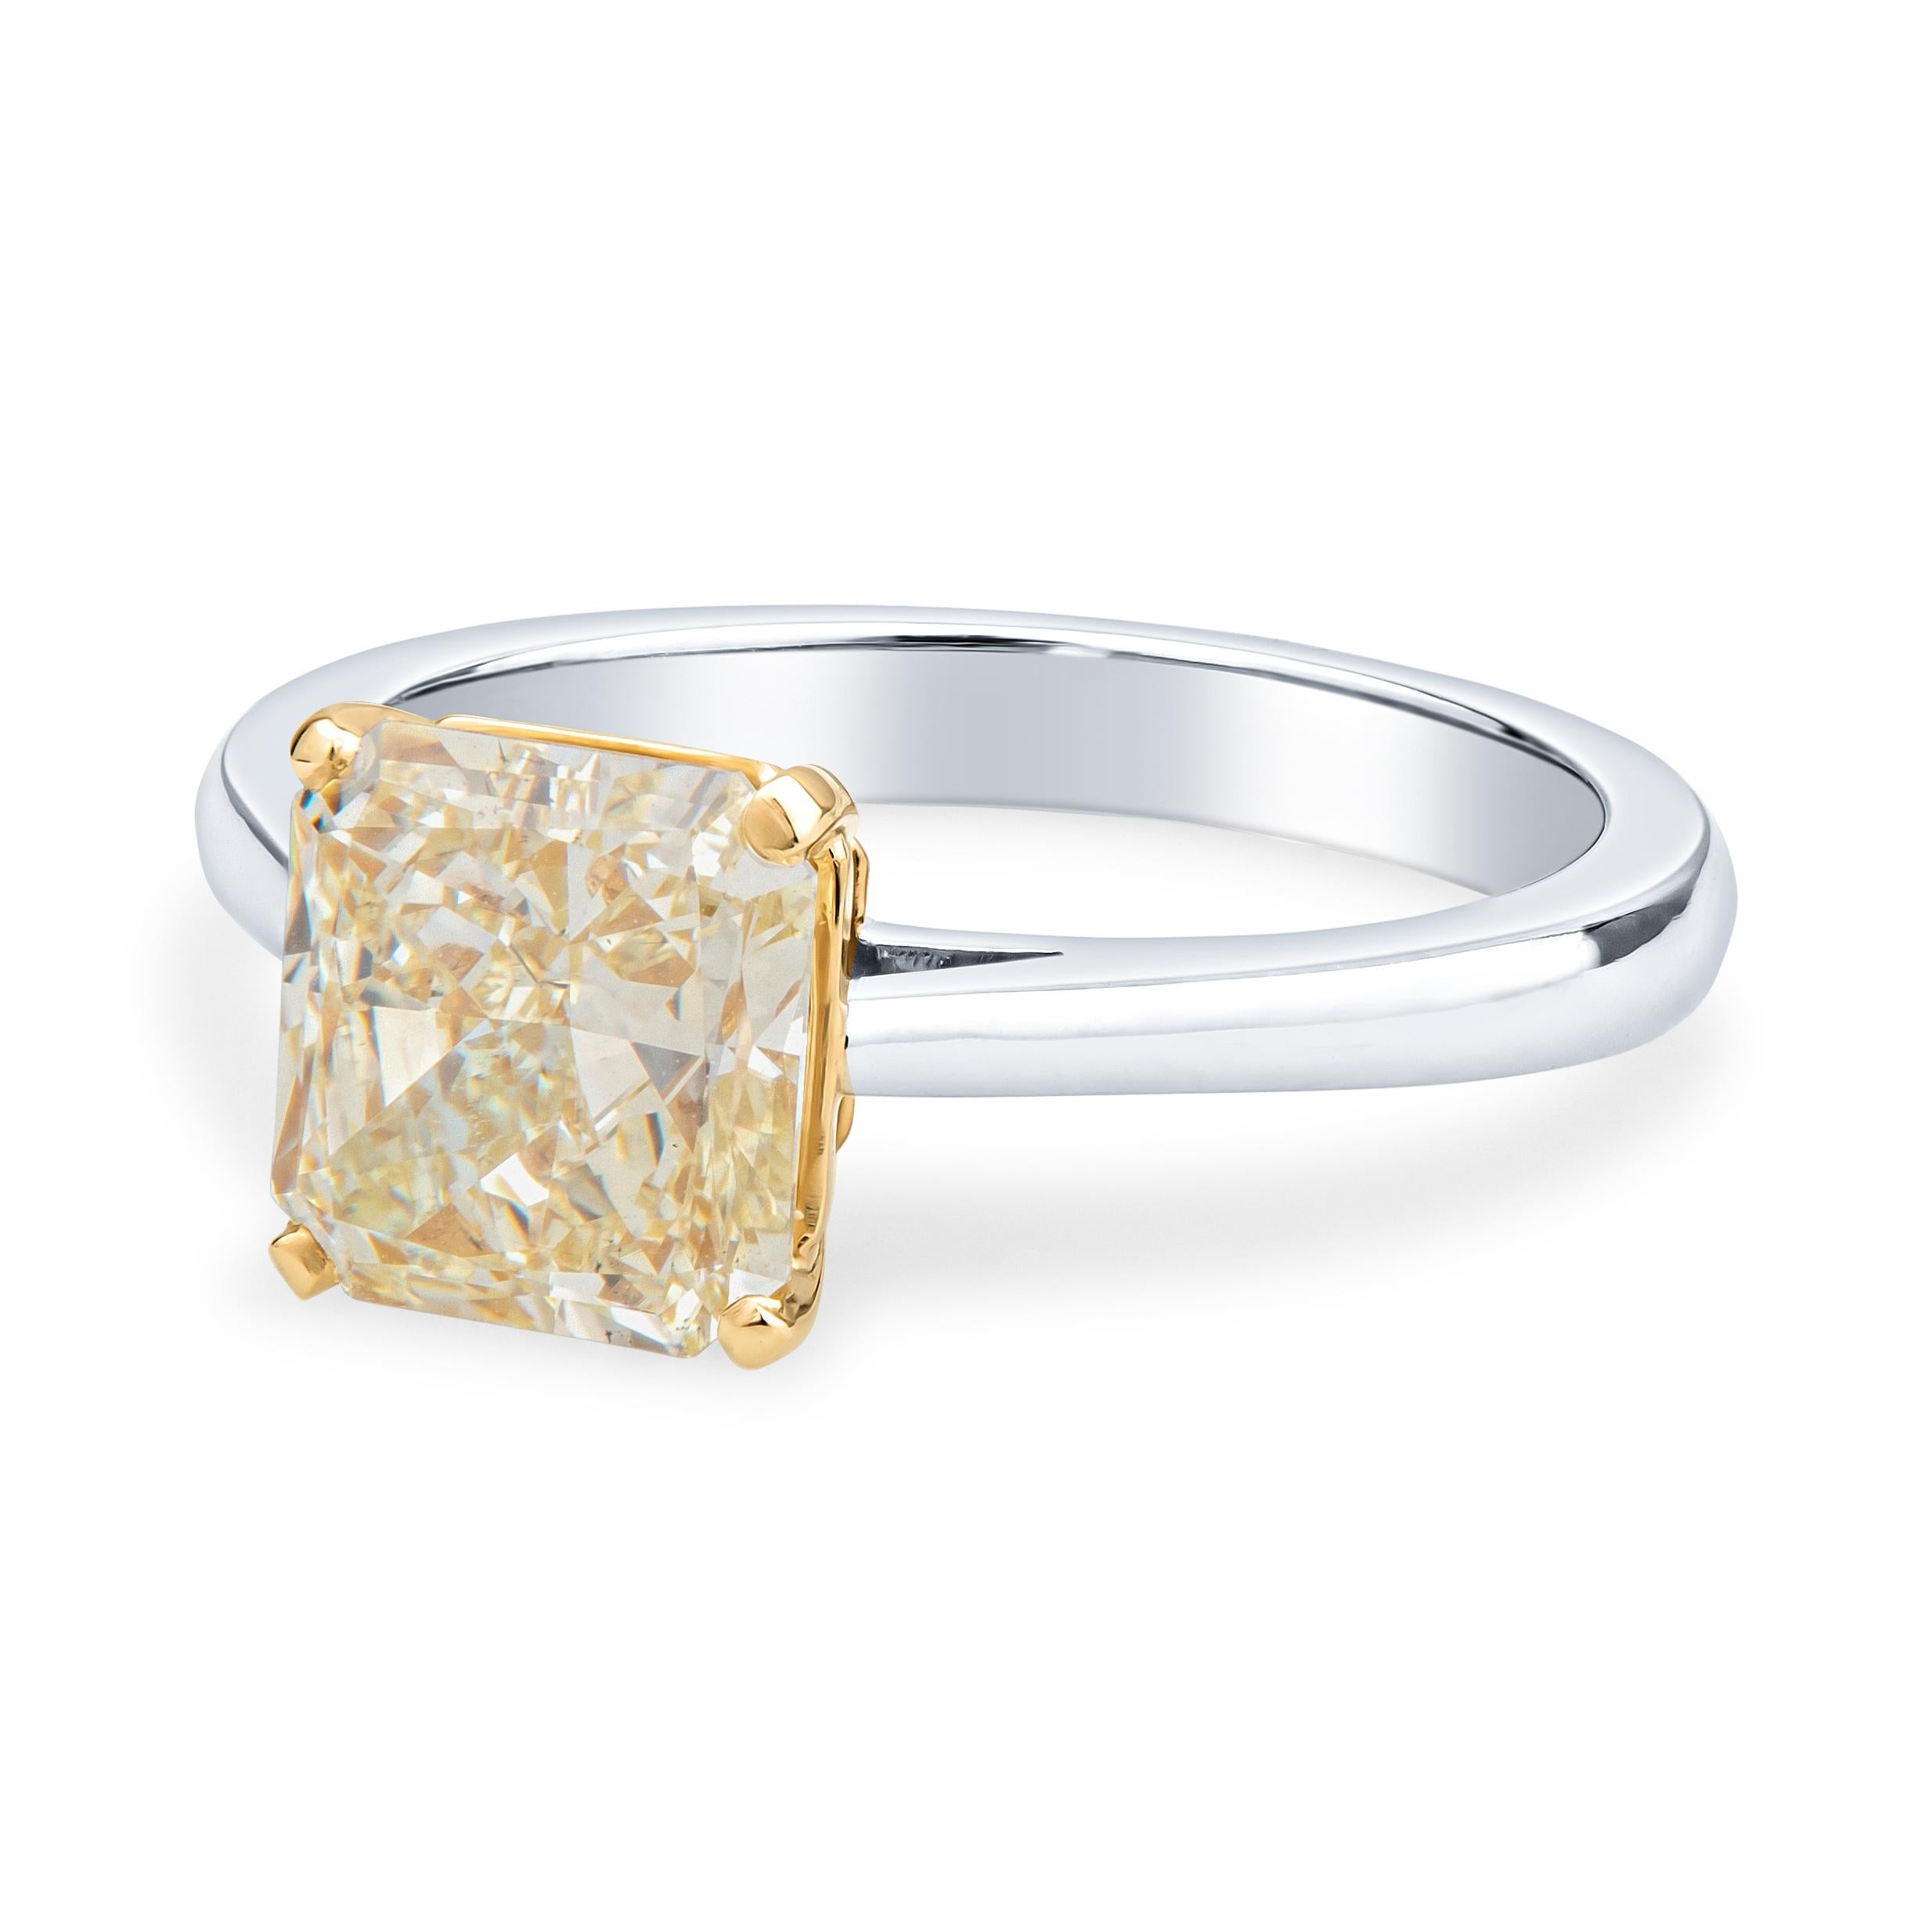 This dainty, beautiful engagement ring from the world famous Graff jewelry house features a 2.16ct radiant cut, fancy light yellow diamond, VS2 clarity, set in an 18kt yellow gold setting to complement the yellow hue of the diamond. The band is